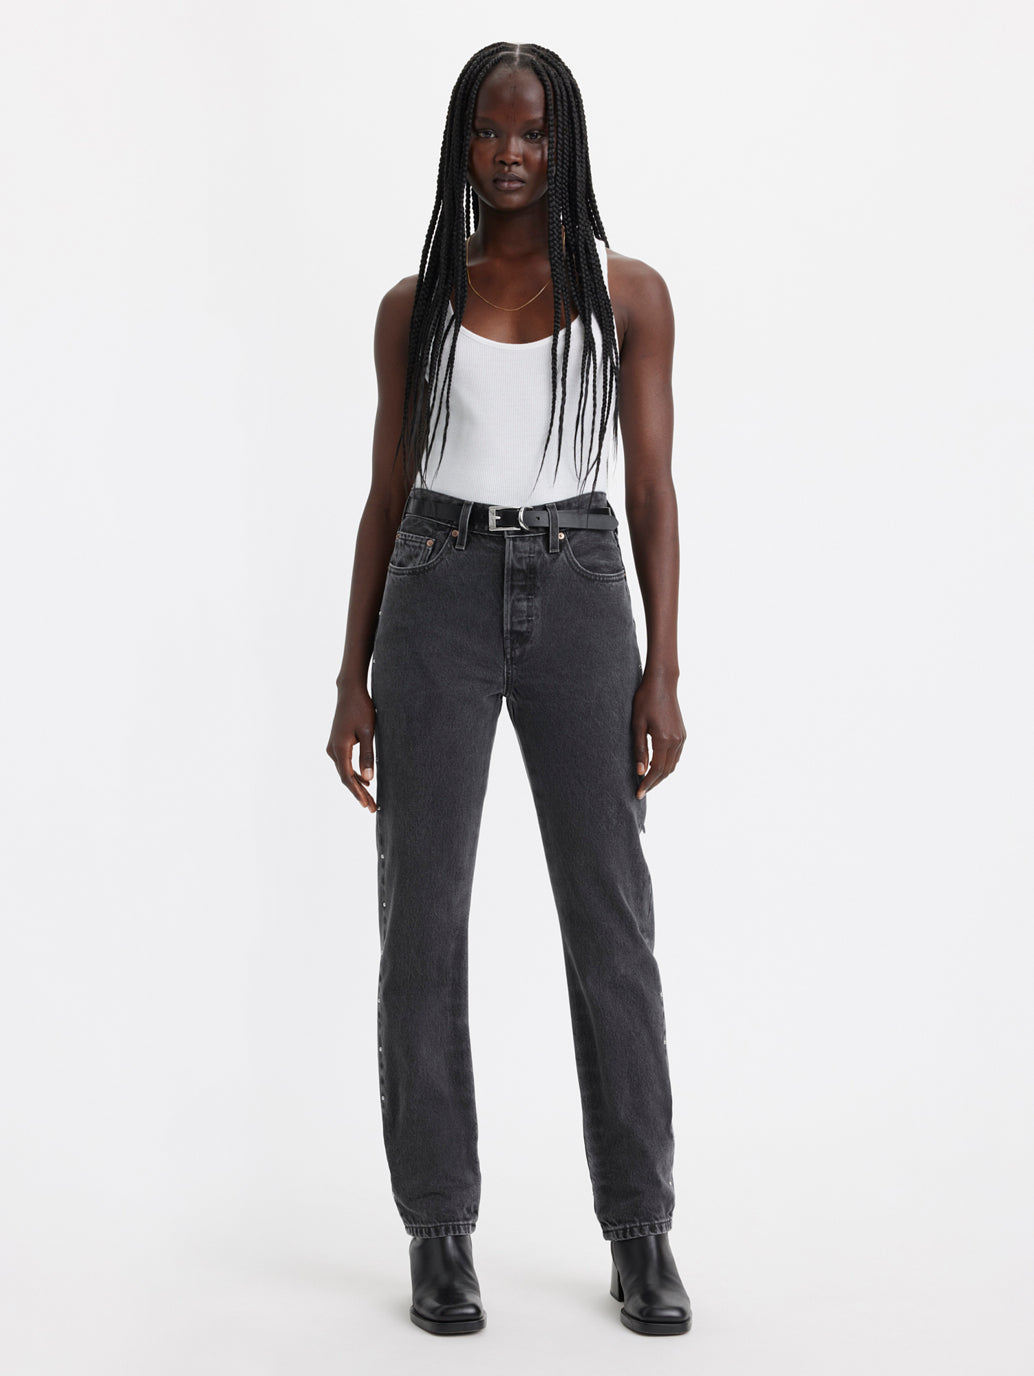 Levi's Women's 501 Original Fit Jeans (Also Available in Plus